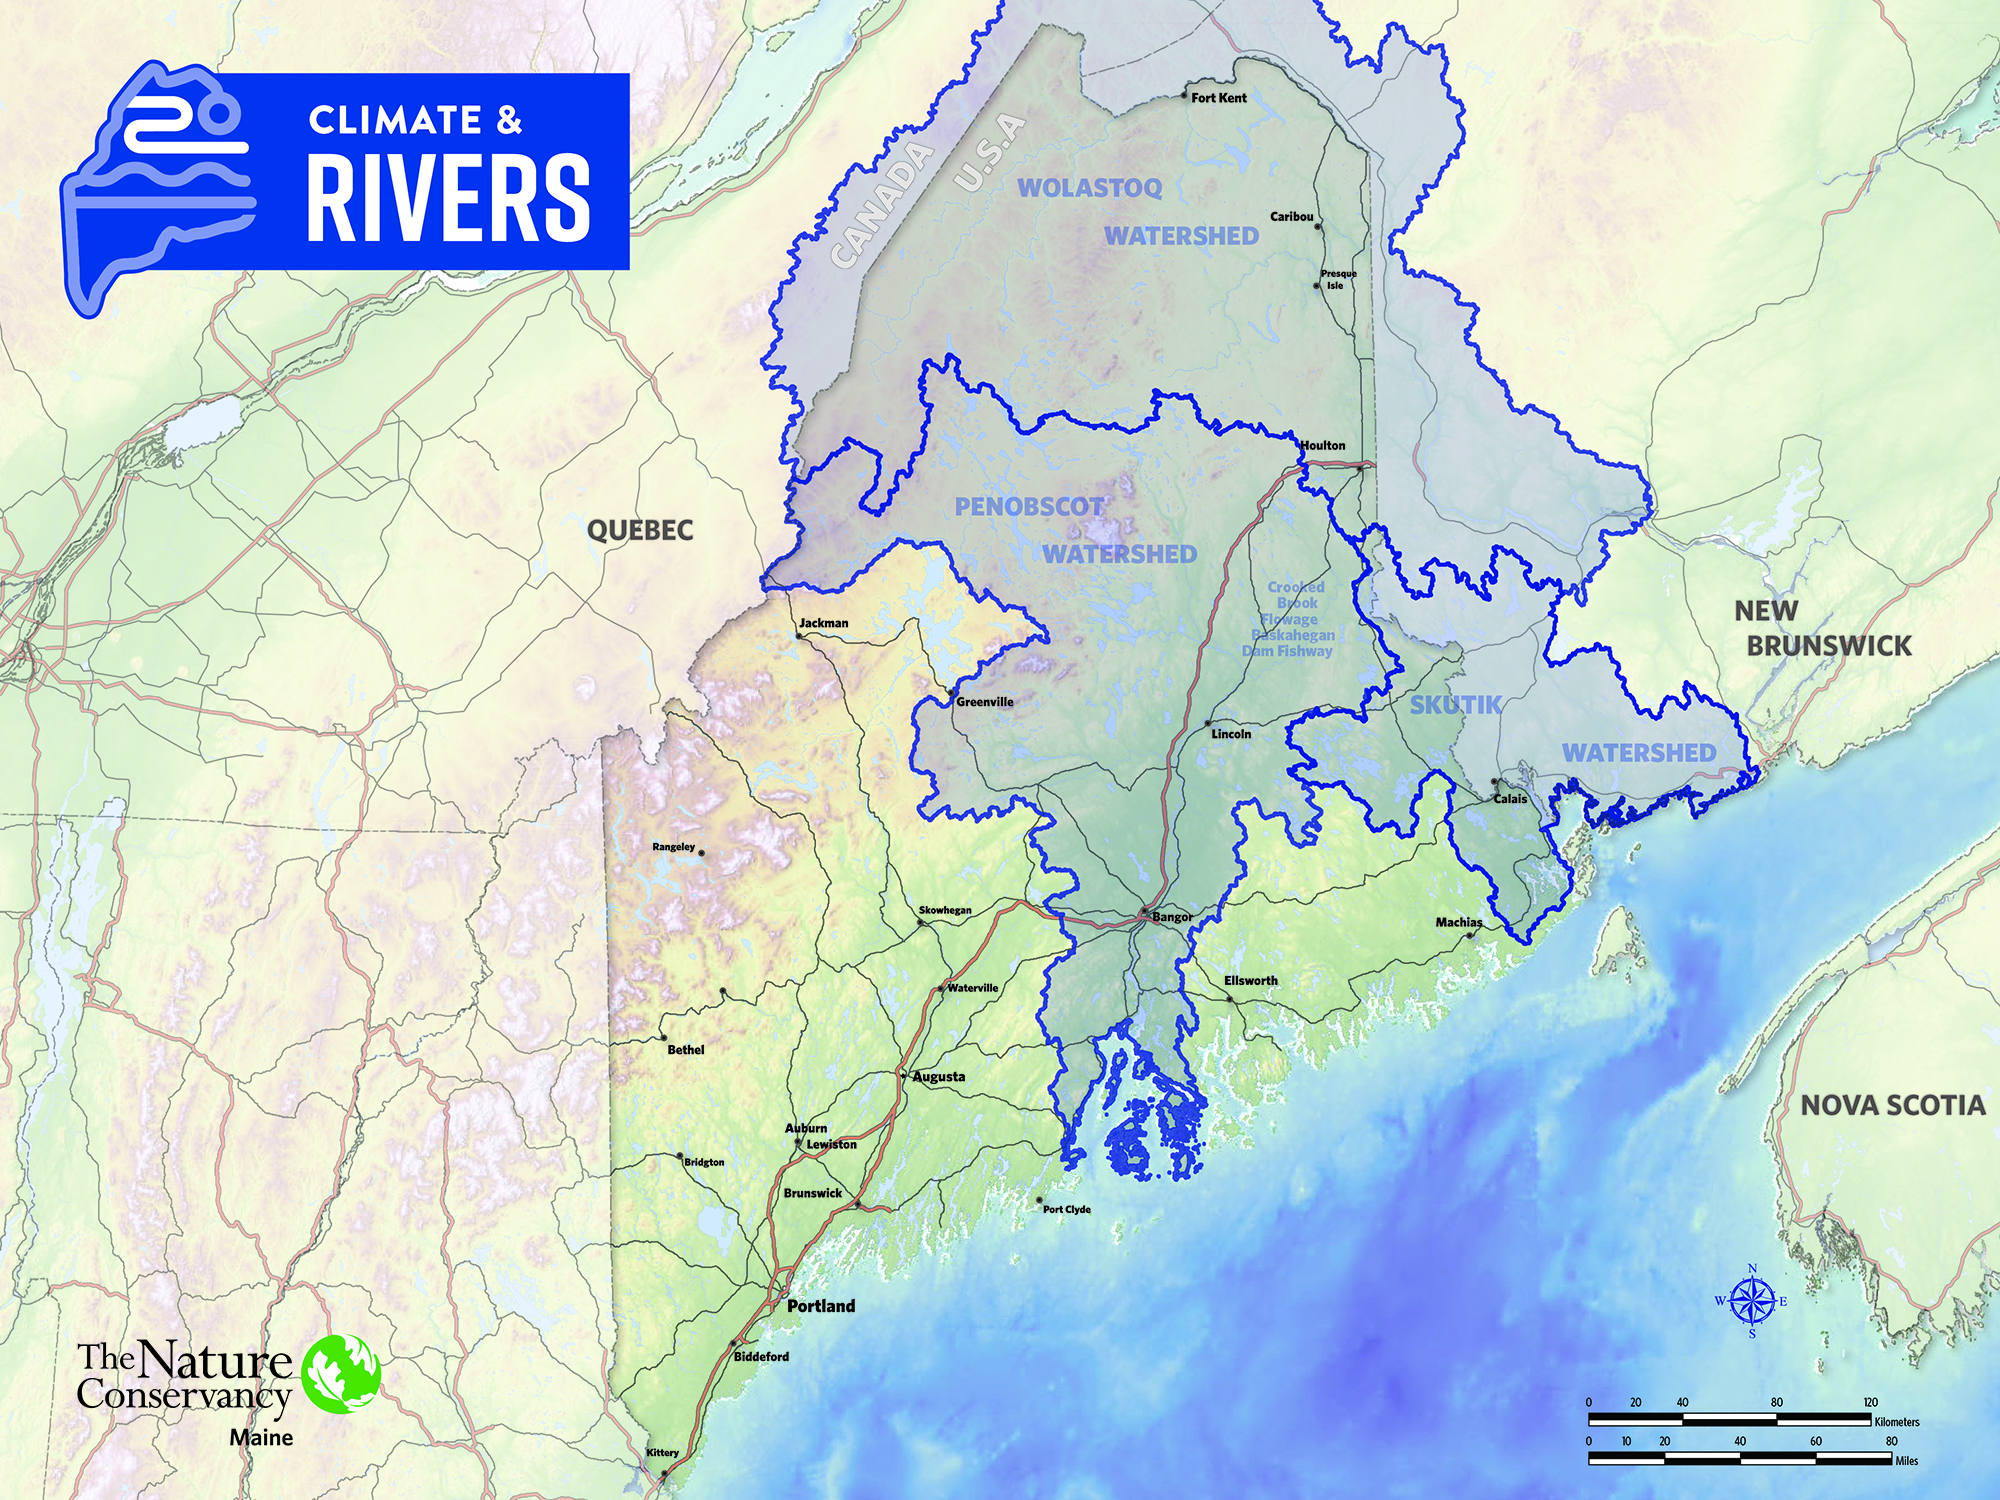 A map shows the state of Maine with an outline of significant watersheds.